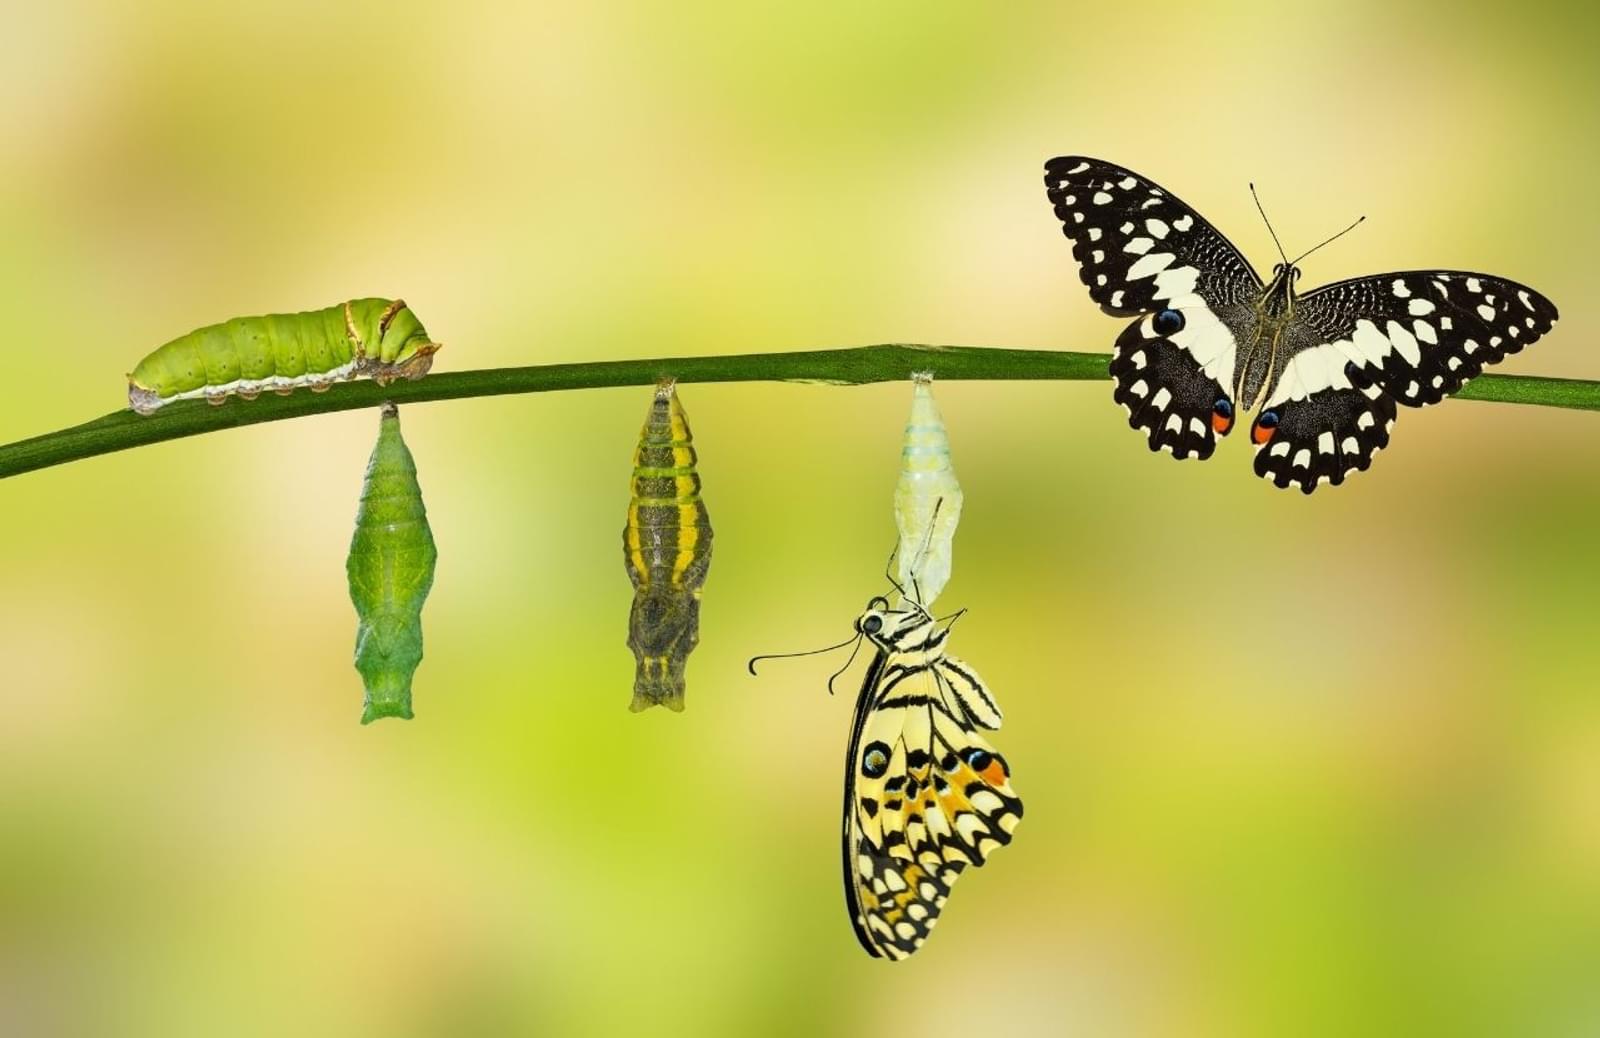 Tree branch holding caterpillar, chrysalis, and butterfly